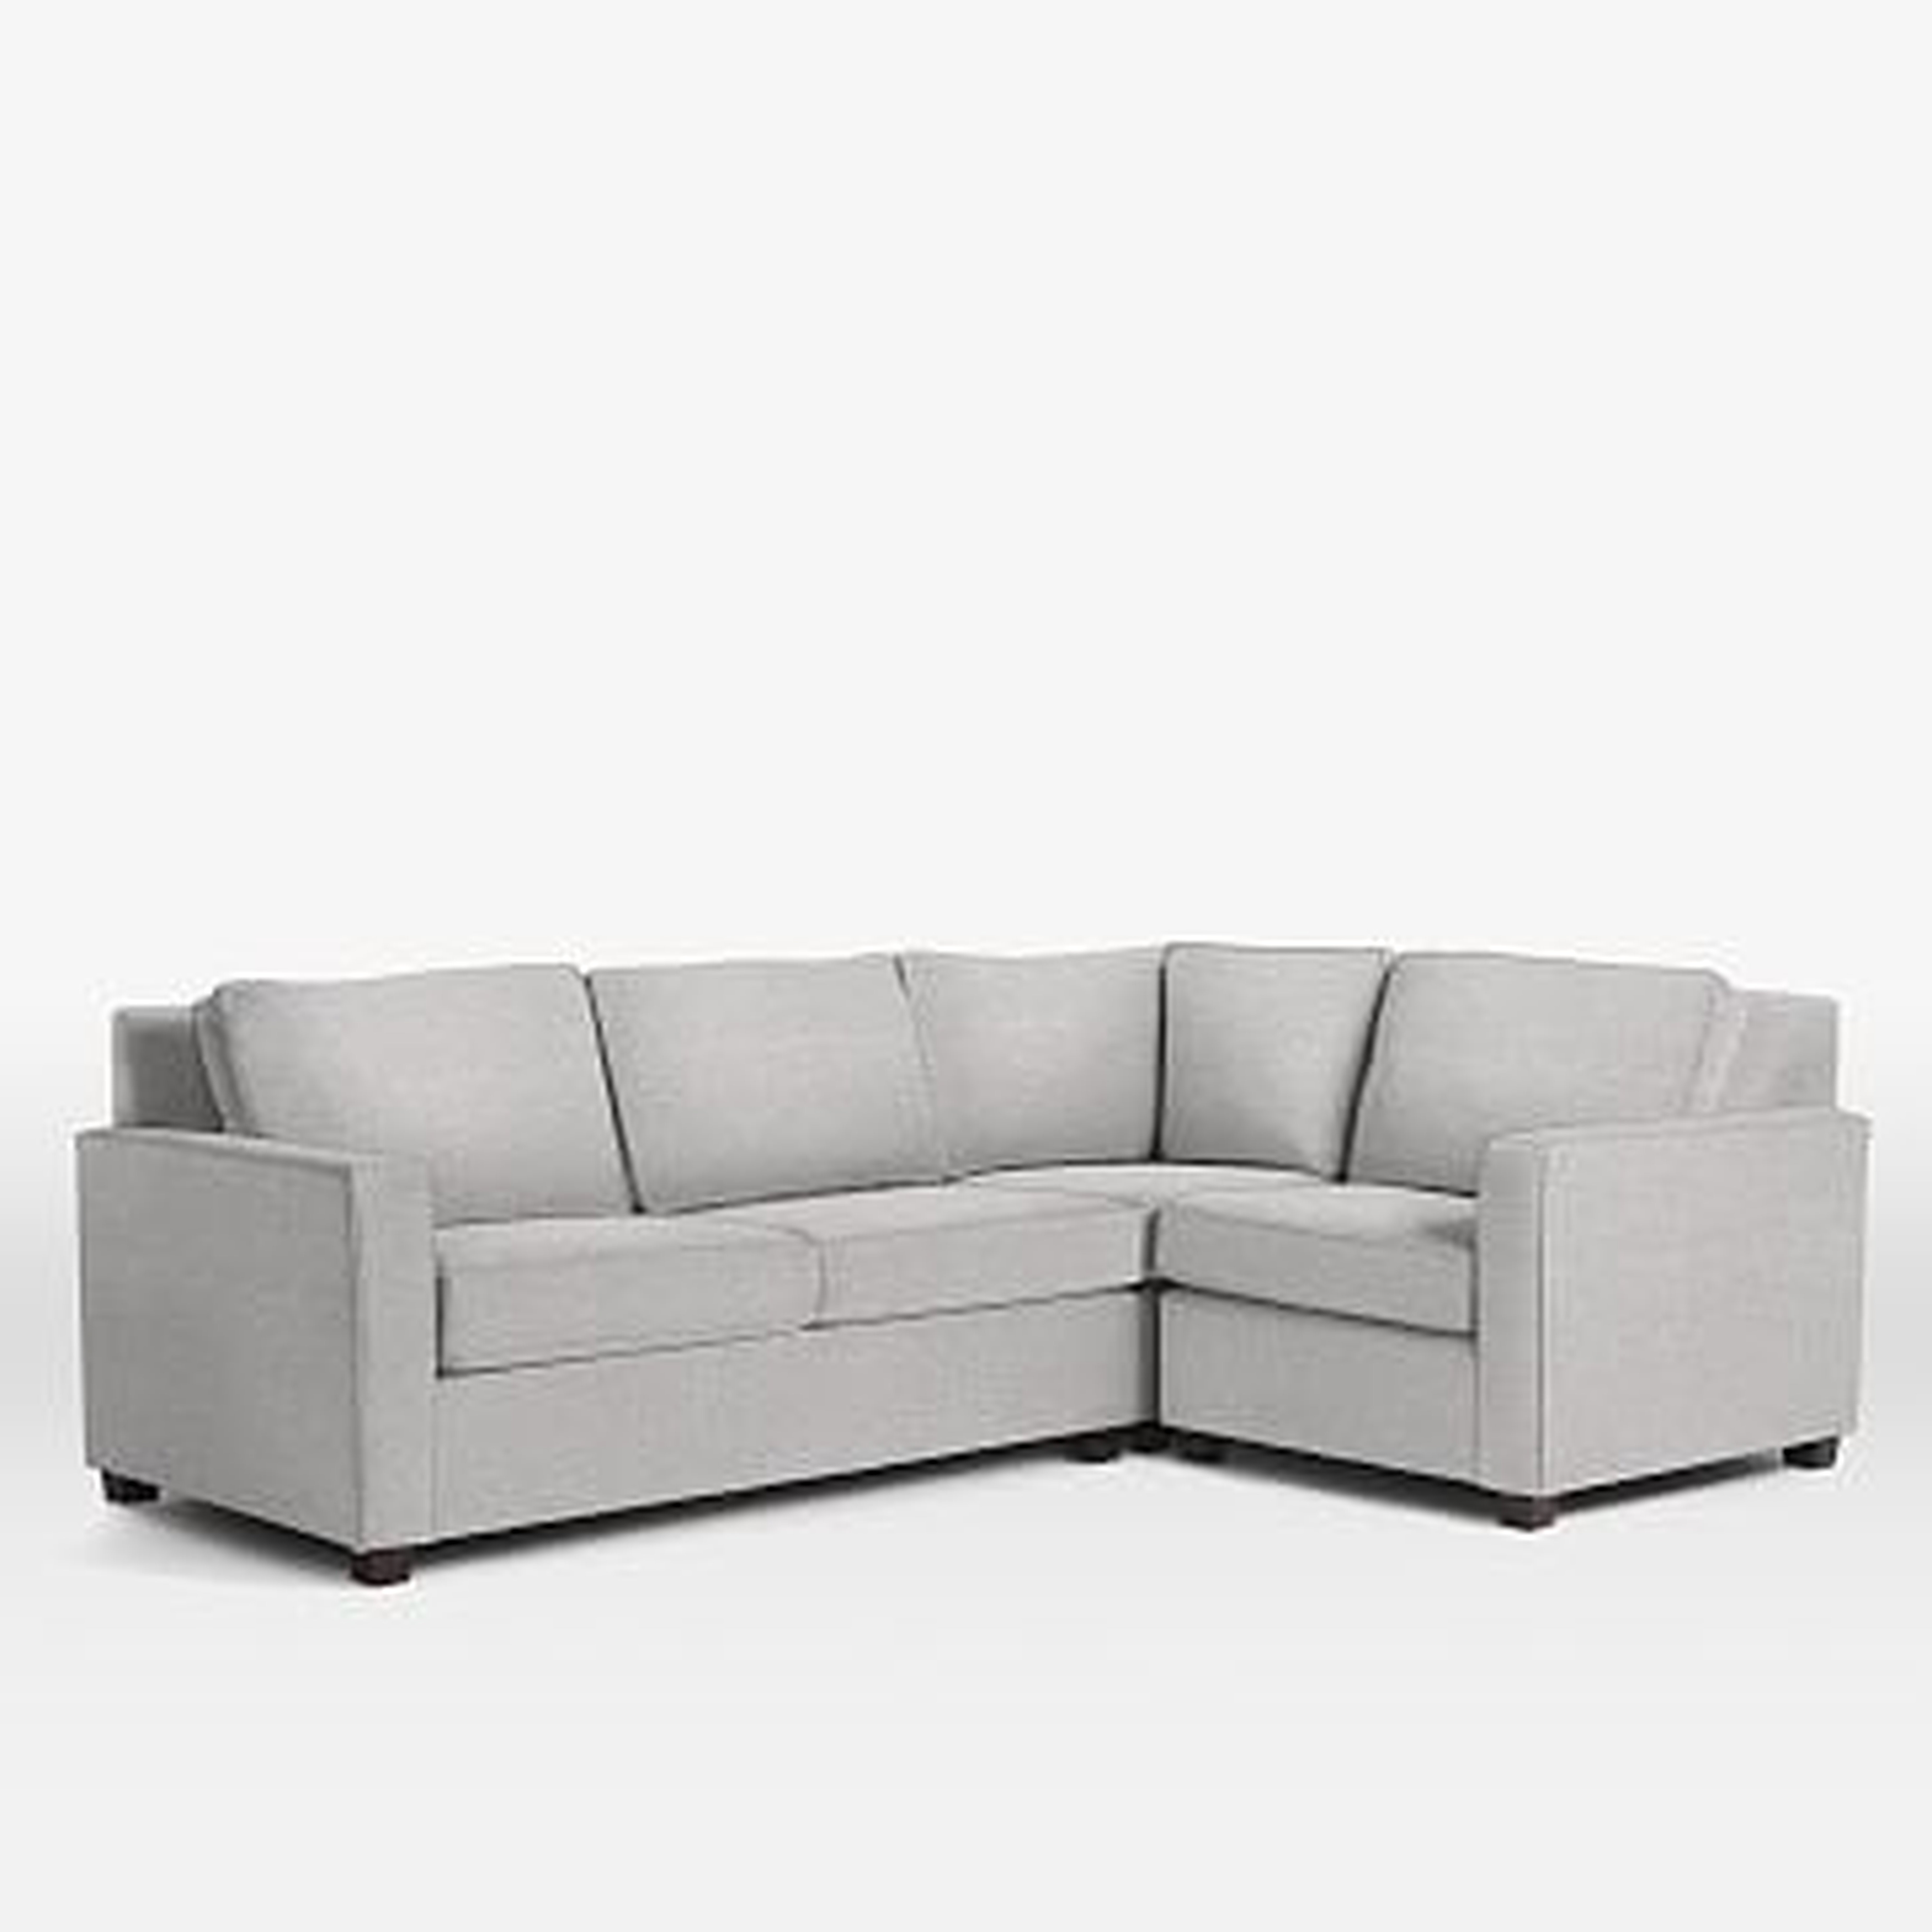 Henry Set 2- (Corner, Left Arm Loveseat, Right Arm Chair), Chenille Tweed, Frost Gray - West Elm